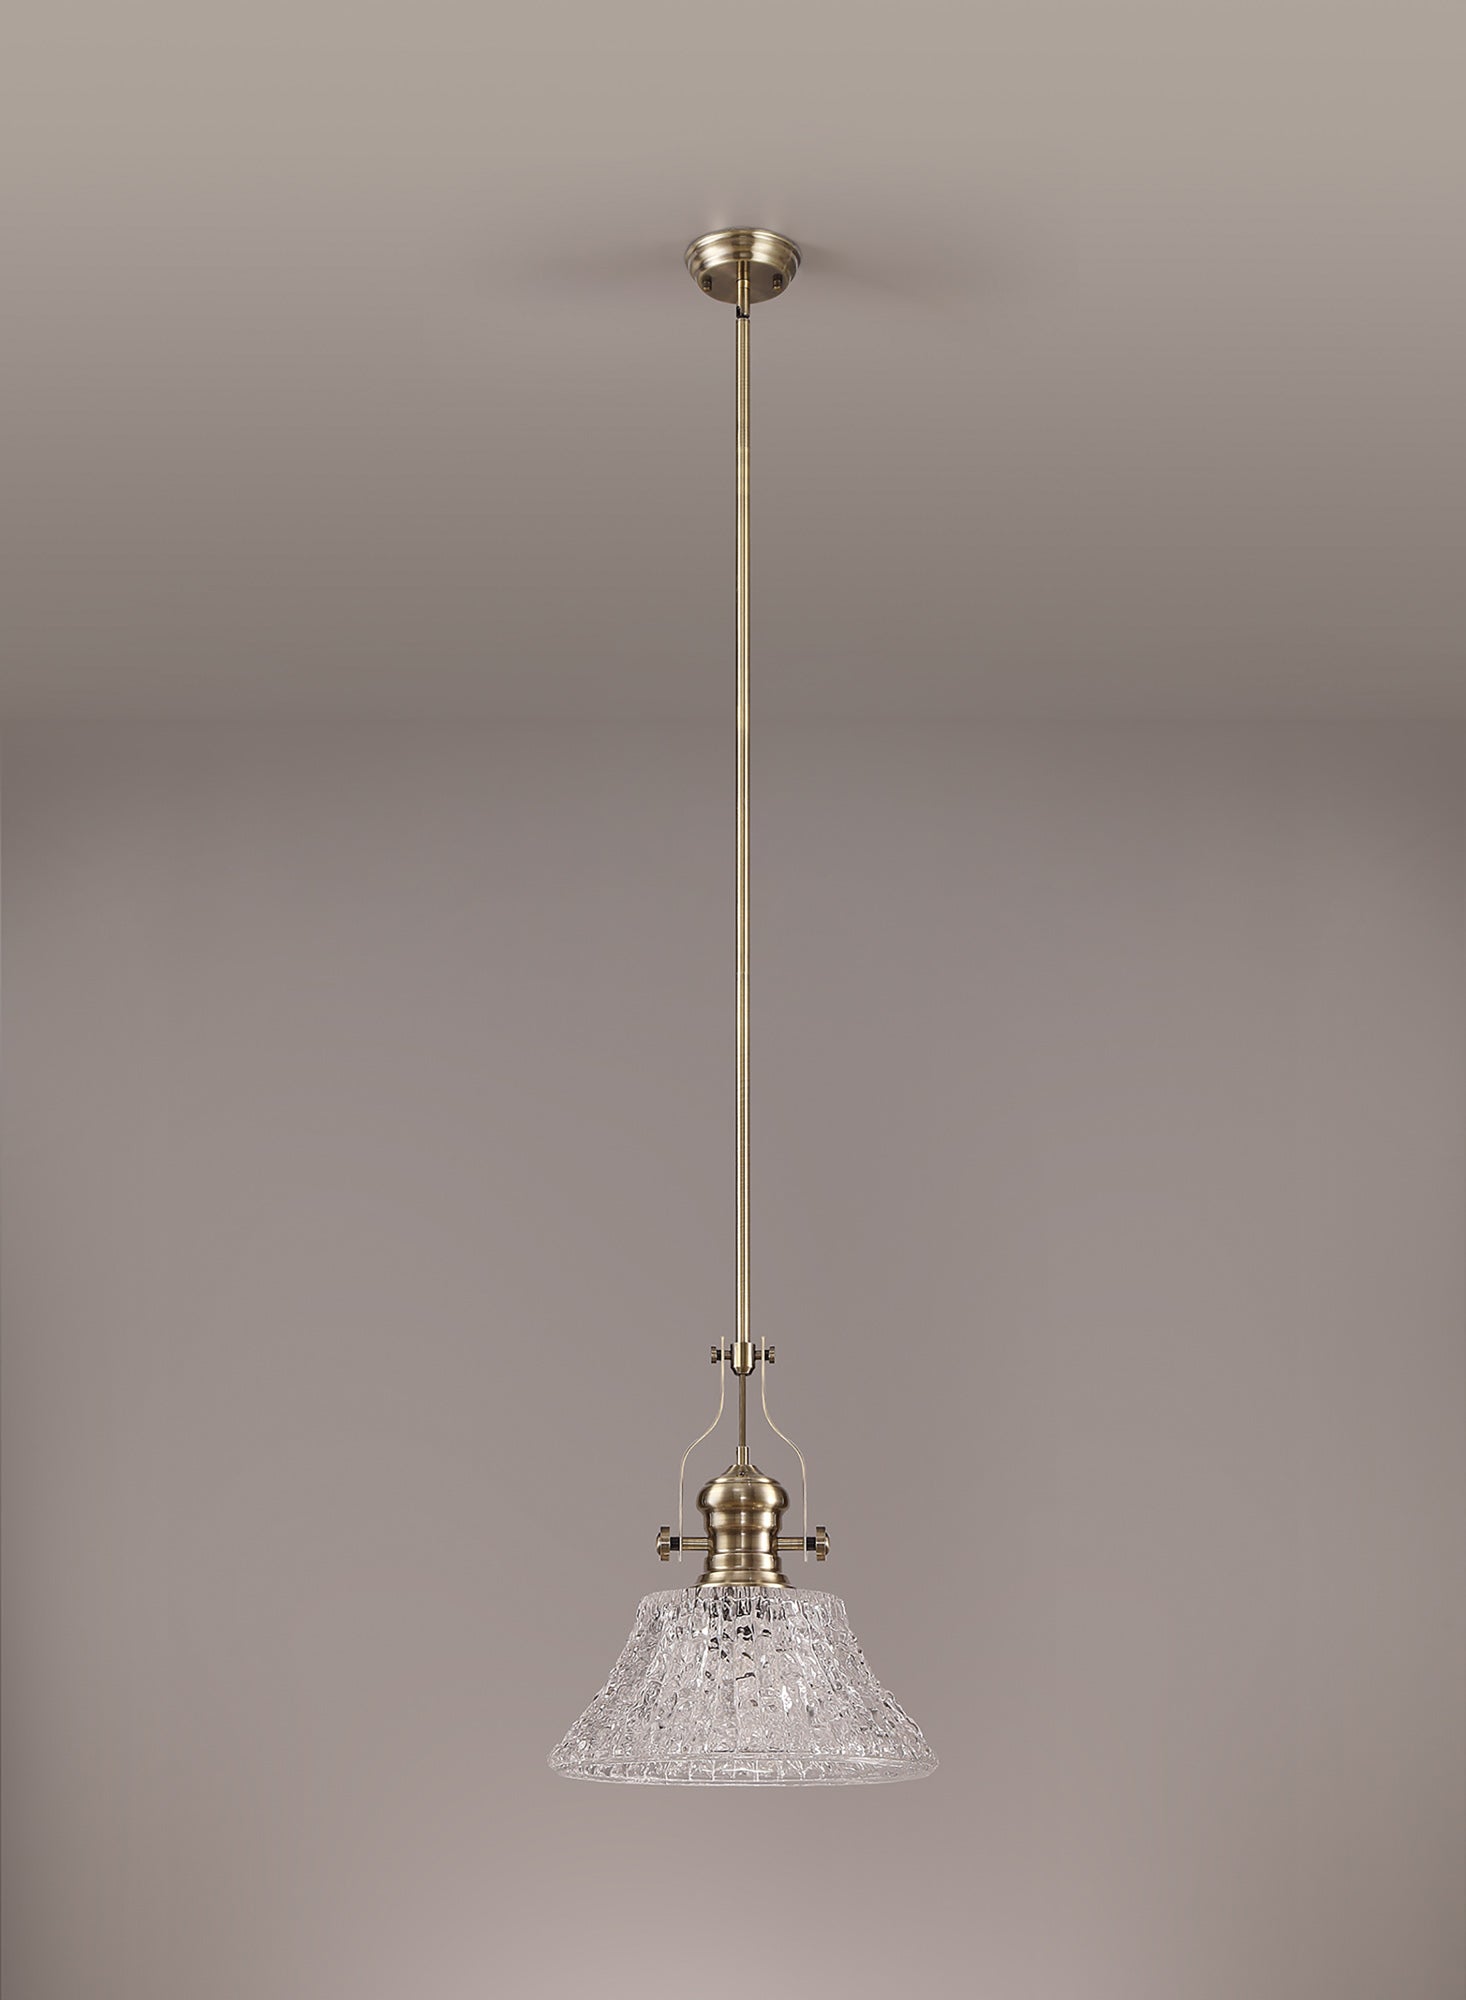 Docker Pendant With 38cm Patterned Round Shade, 1 x E27, Antique Brass/Clear Glass LOK104613